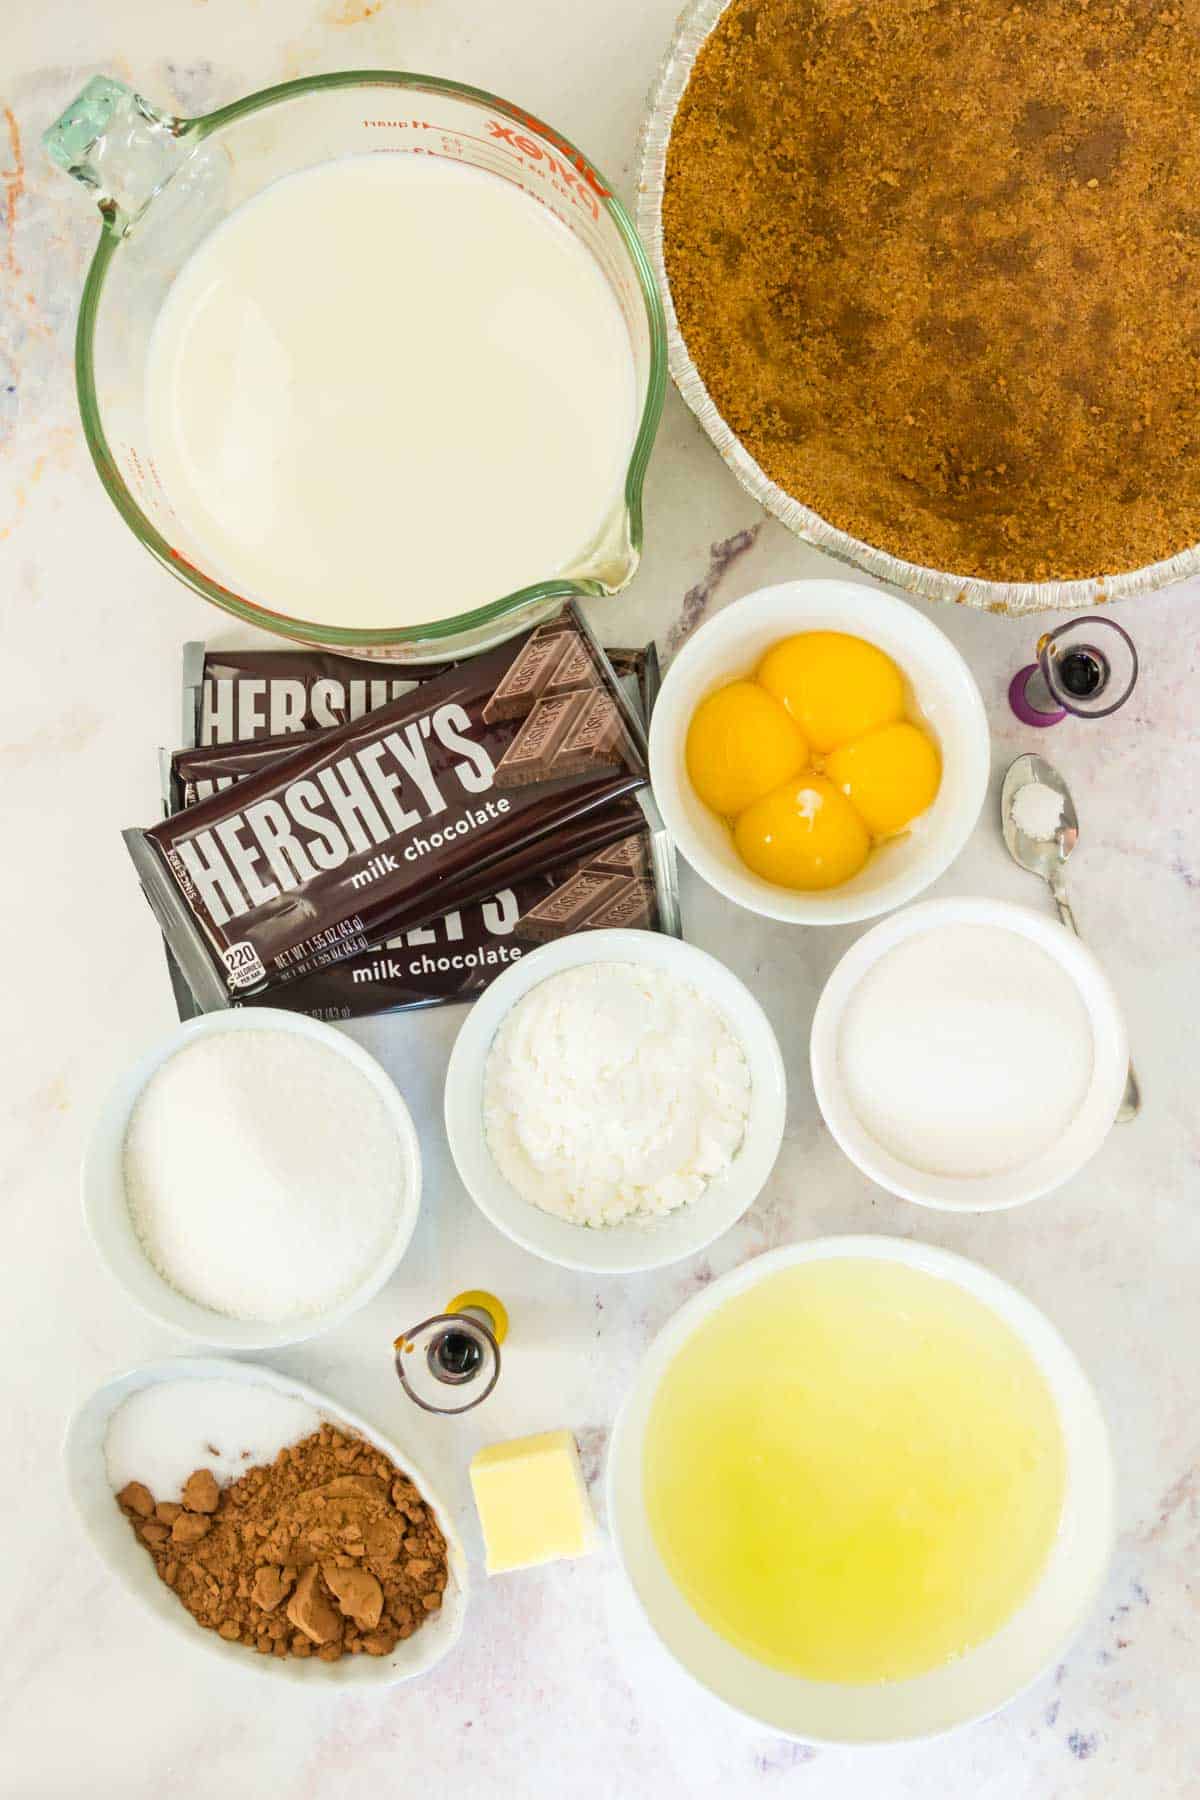 The ingredients for s'mores chocolate pudding pie.